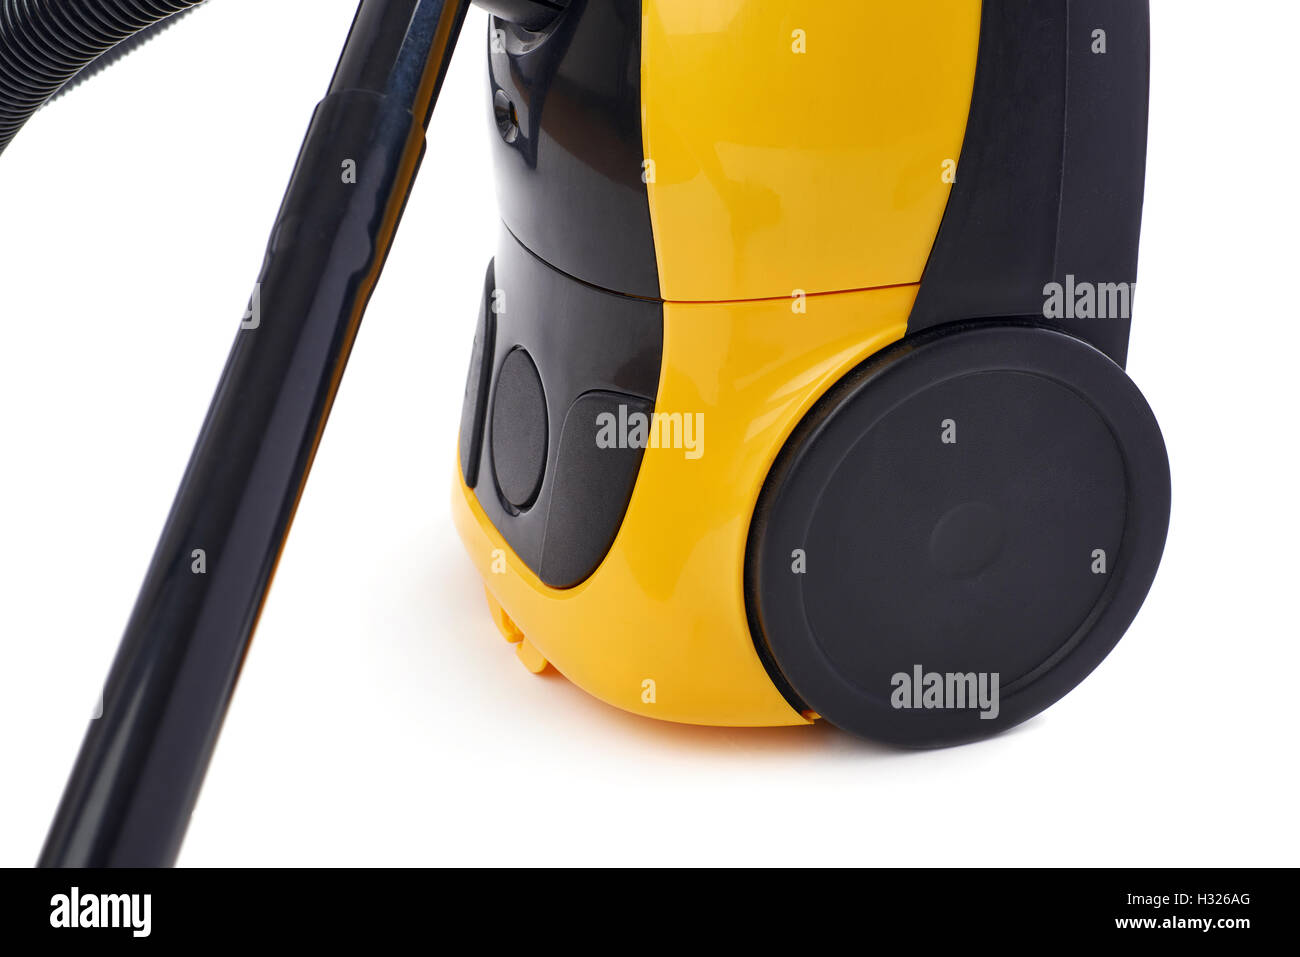 Vacuum cleaner over isolated white background Stock Photo